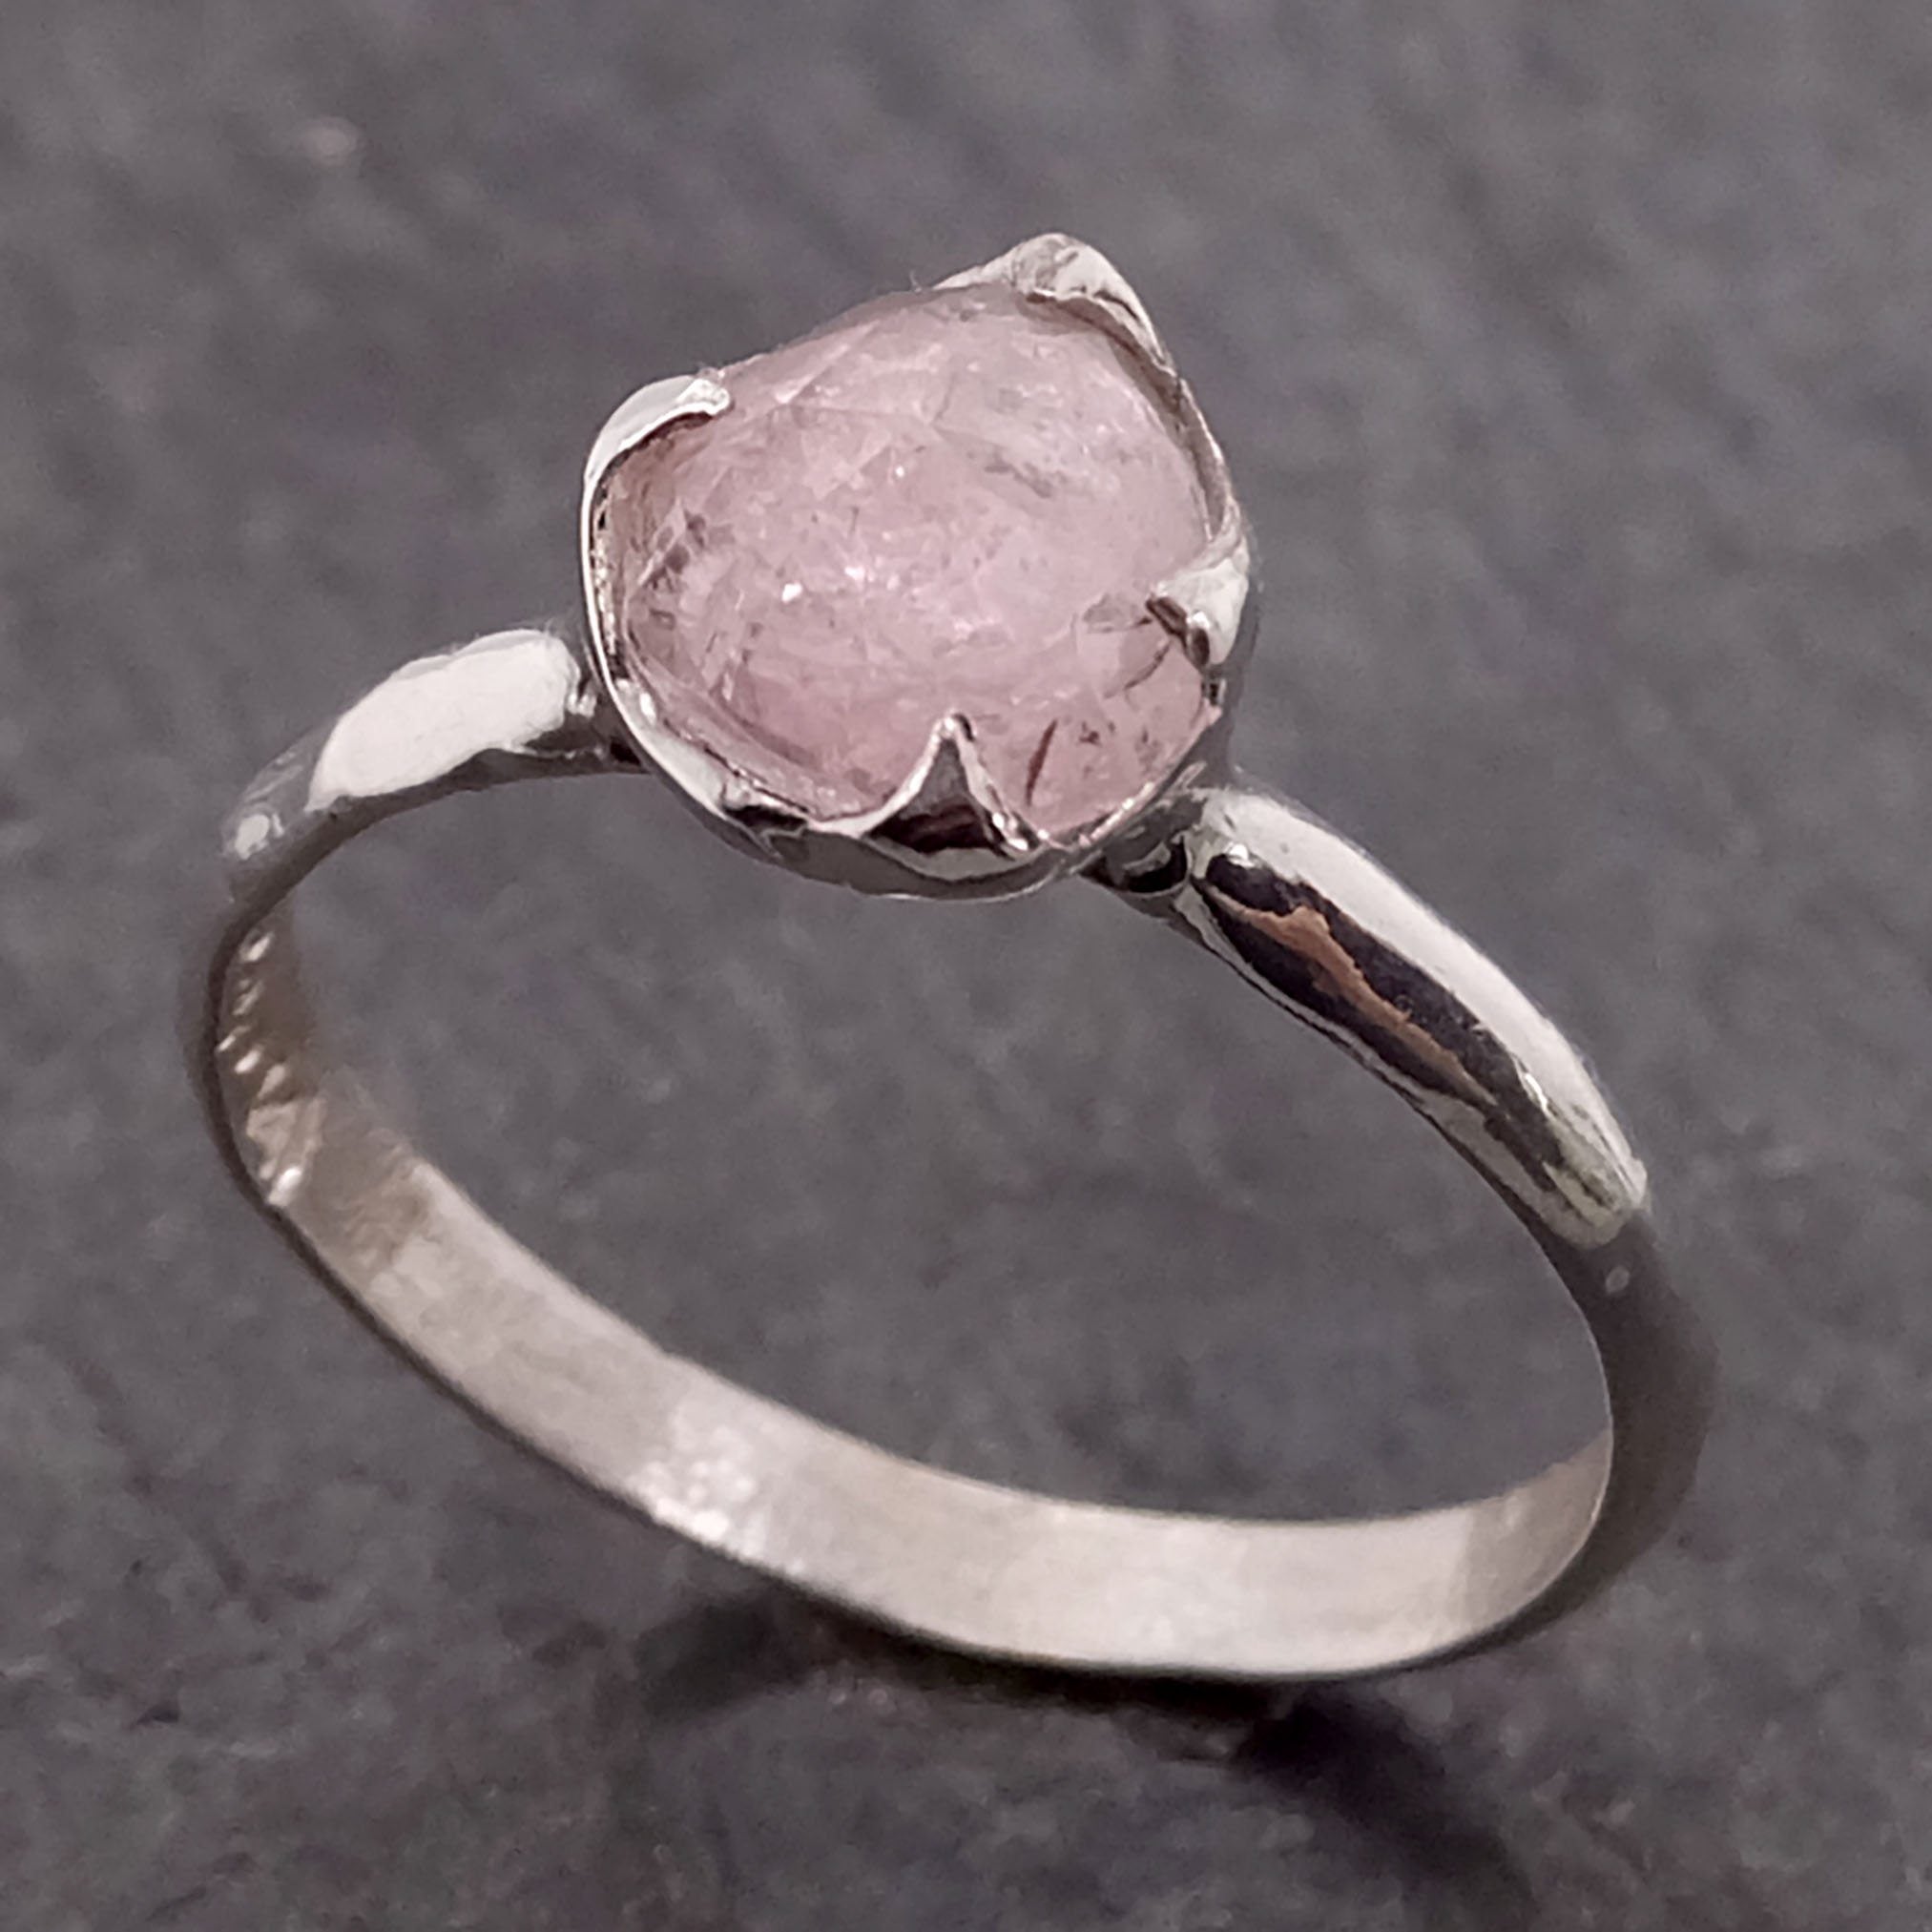 fancy cut pink tourmaline sterling silver ring gemstone solitaire recycled statement ss00033 Alternative Engagement